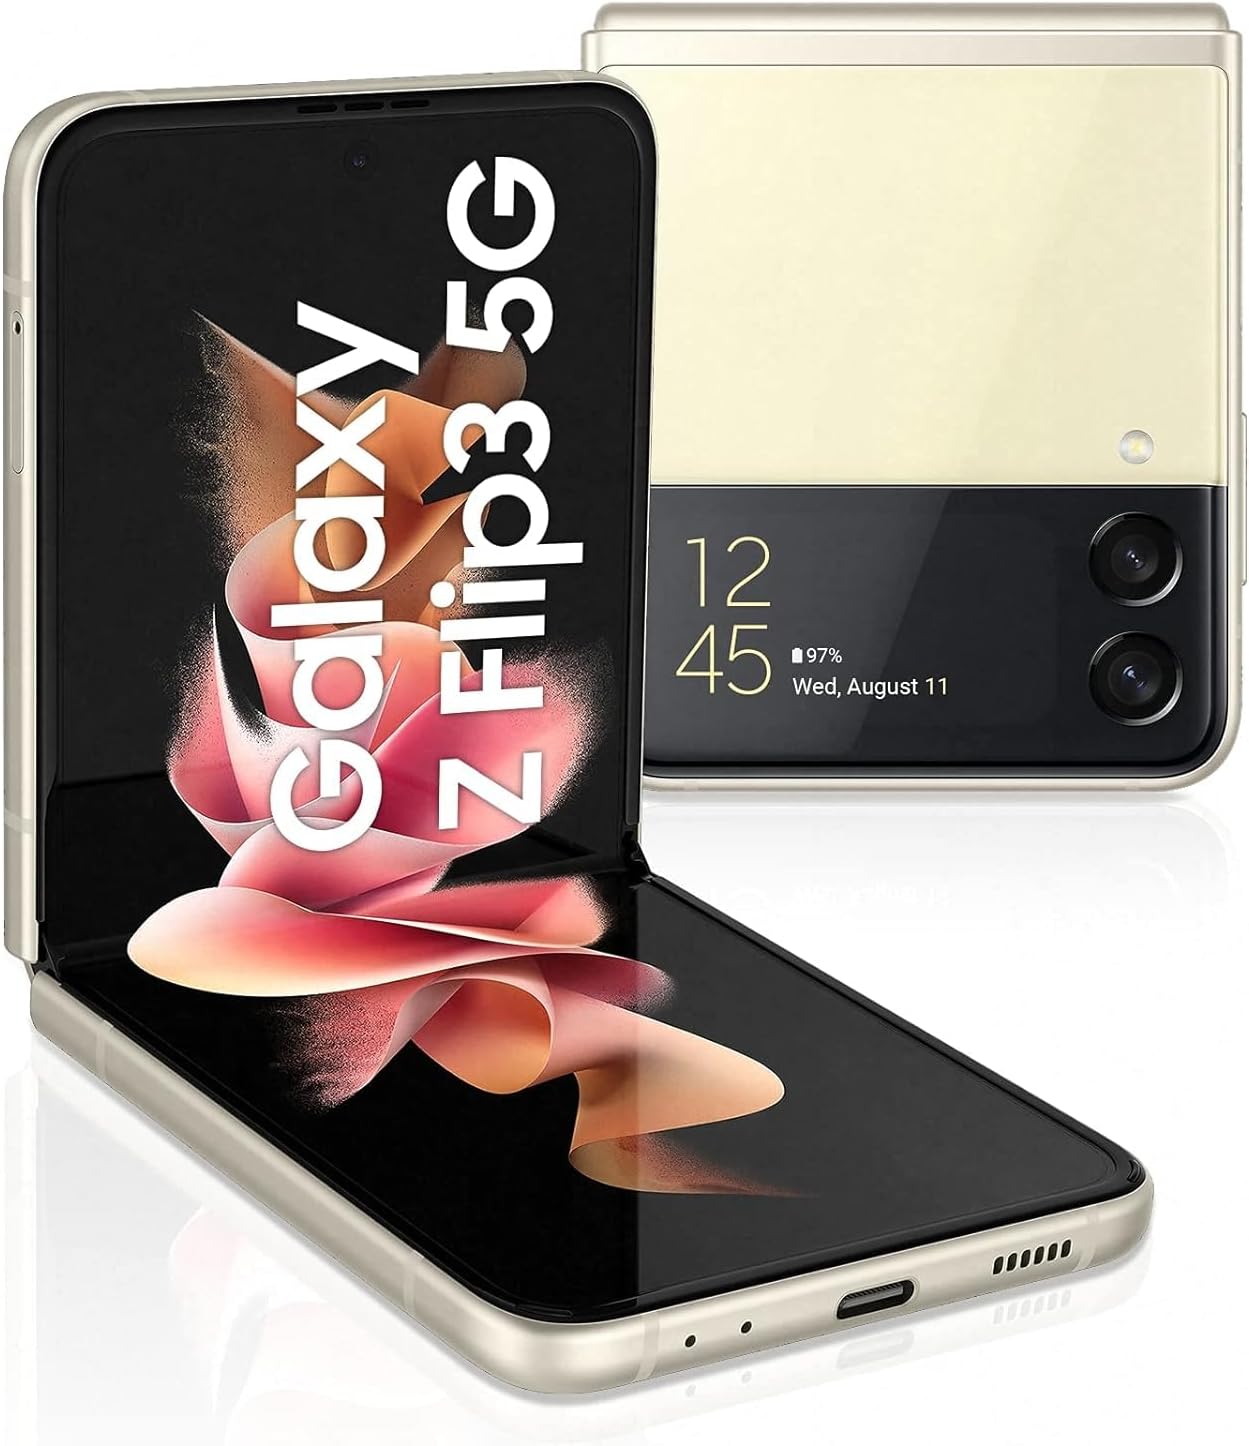 Cream Samsung Galaxy Z Flip3 5G smartphone with 256GB storage and 8GB RAM, unfolds to reveal stunning design angles. 8806092812512